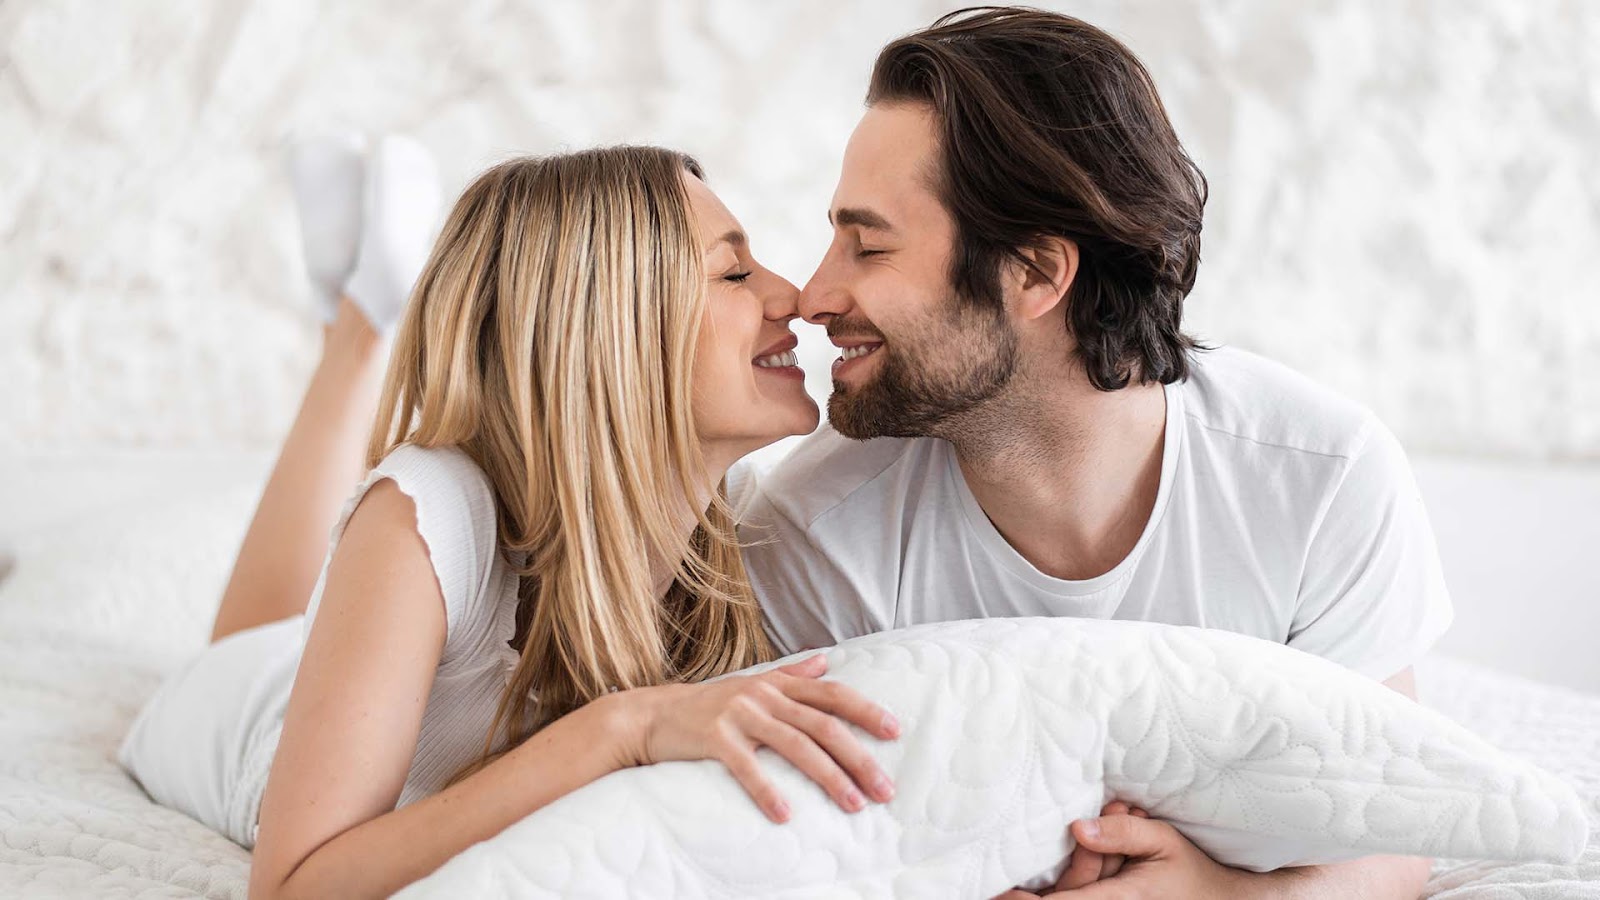 blonde woman and brunette man smiling while touching their noses together